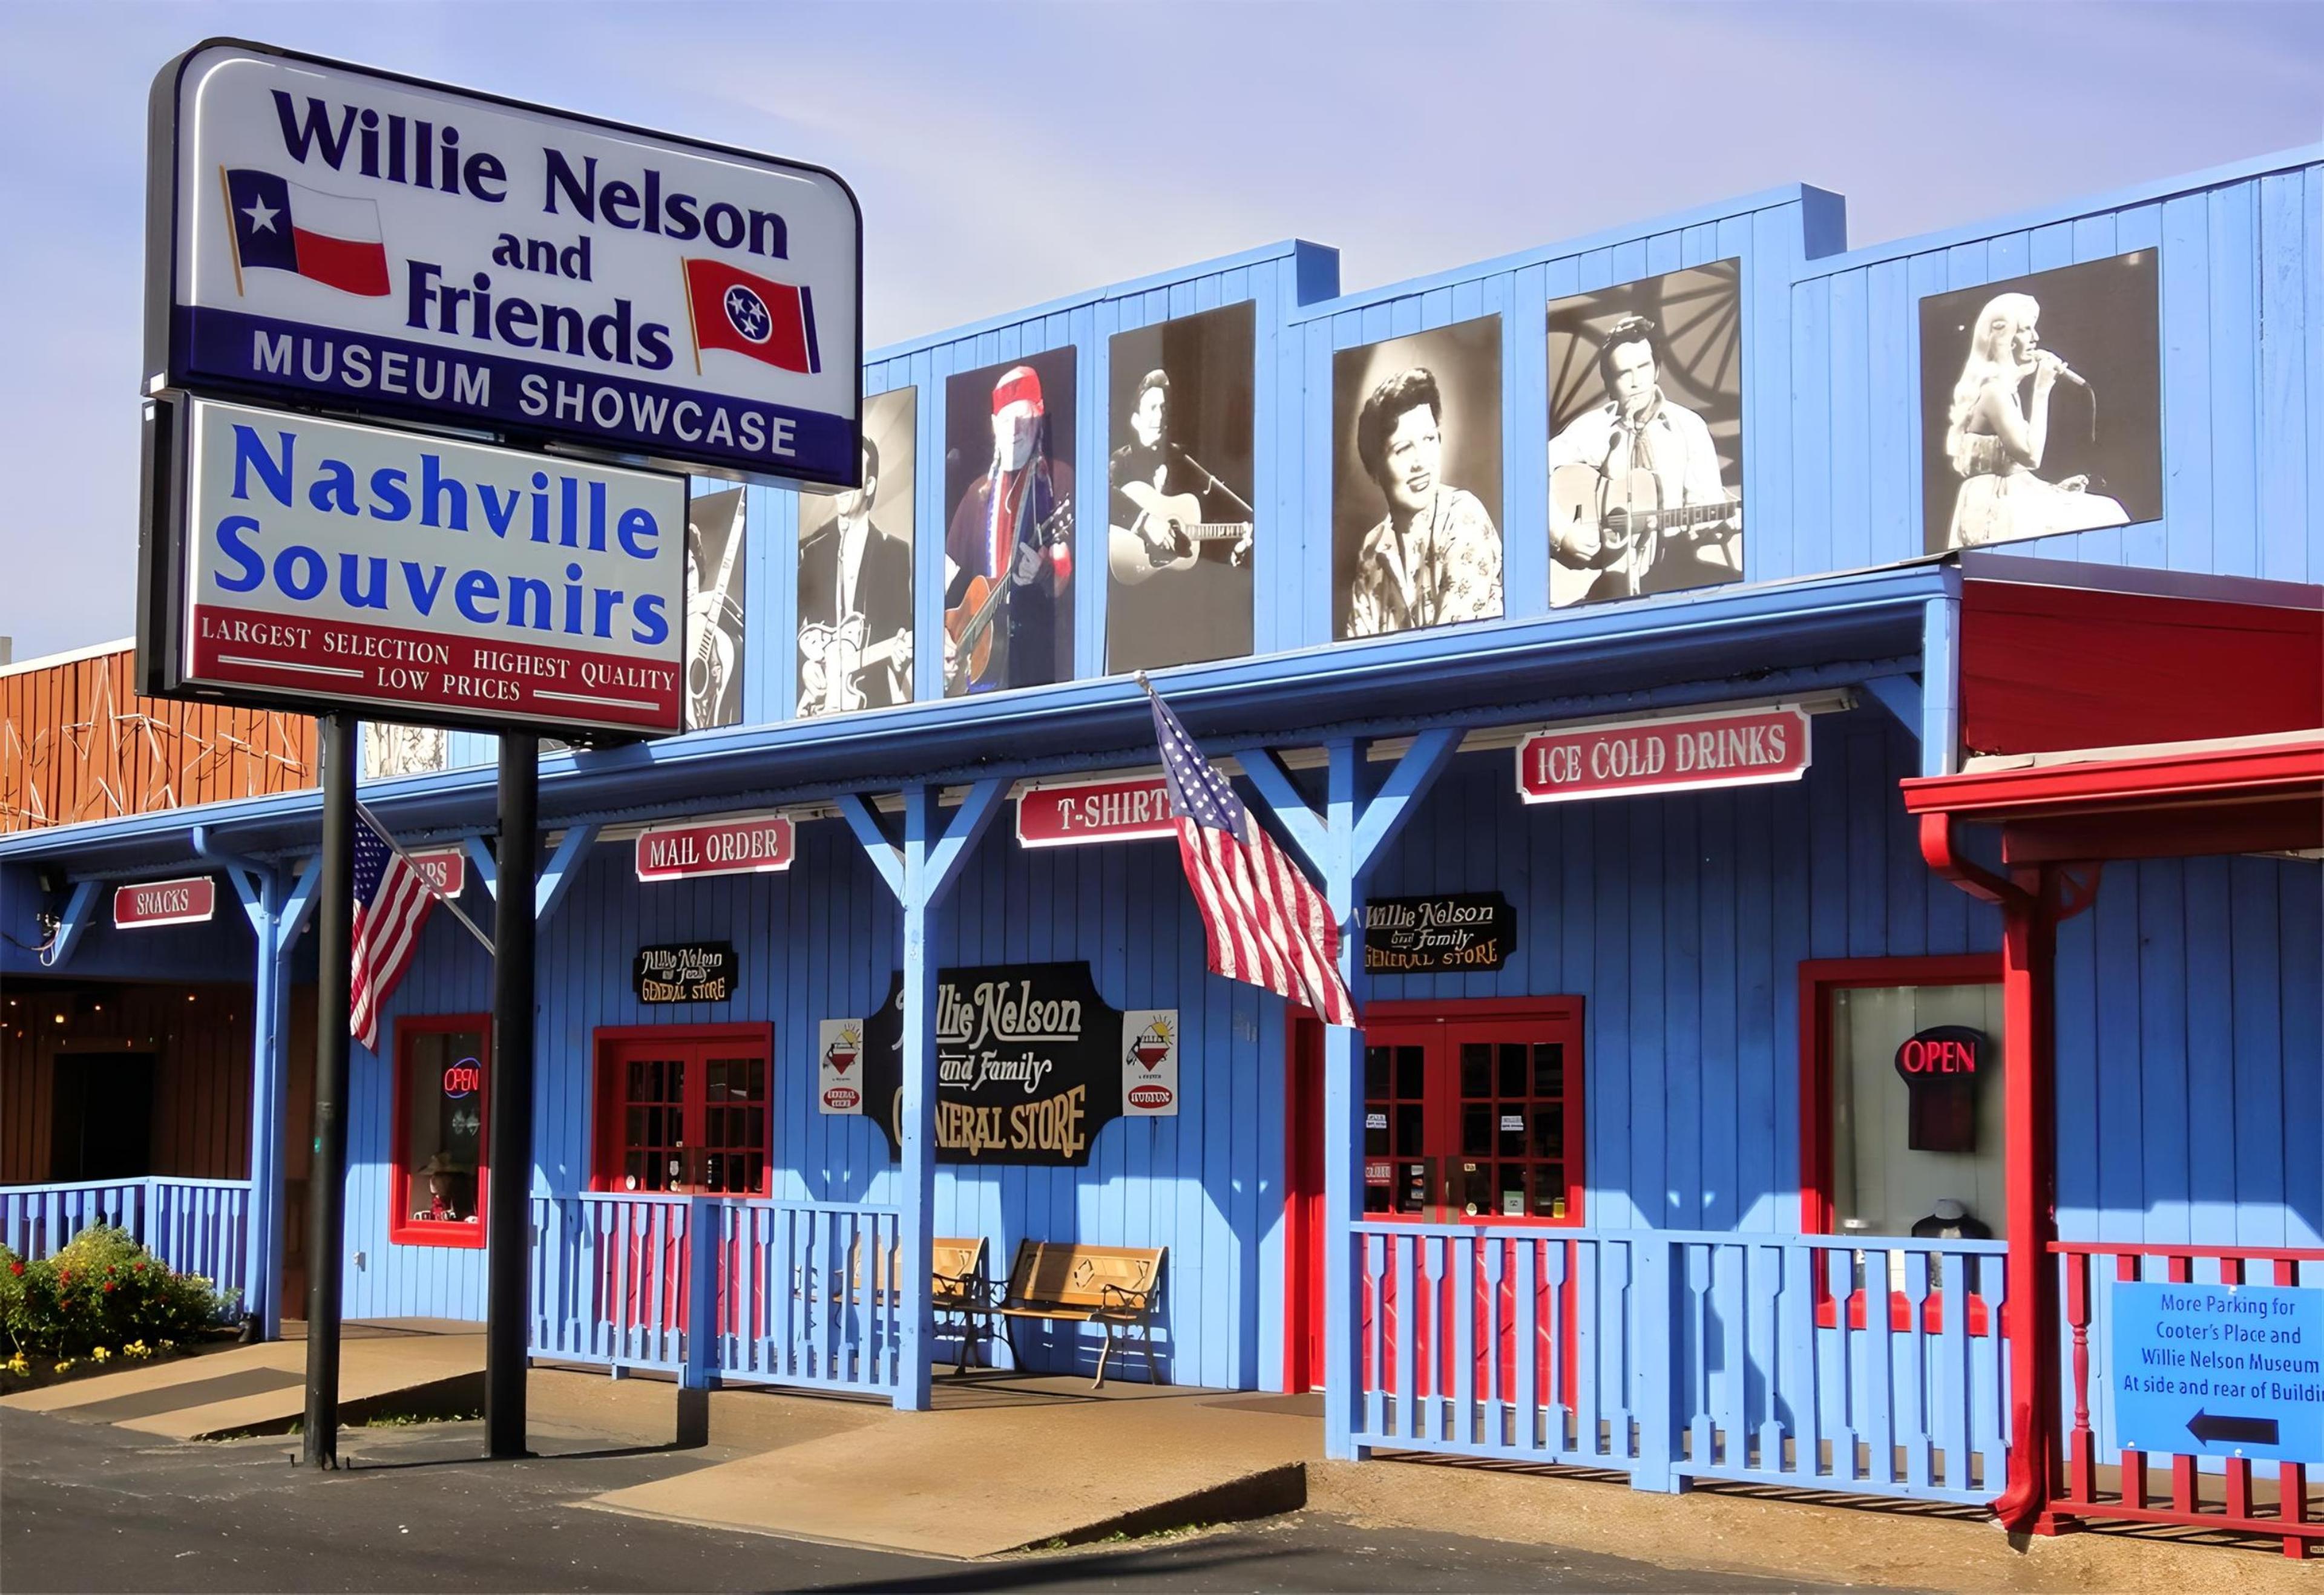 Willie Nelson and Friends Museum and Nashville Souvenirs